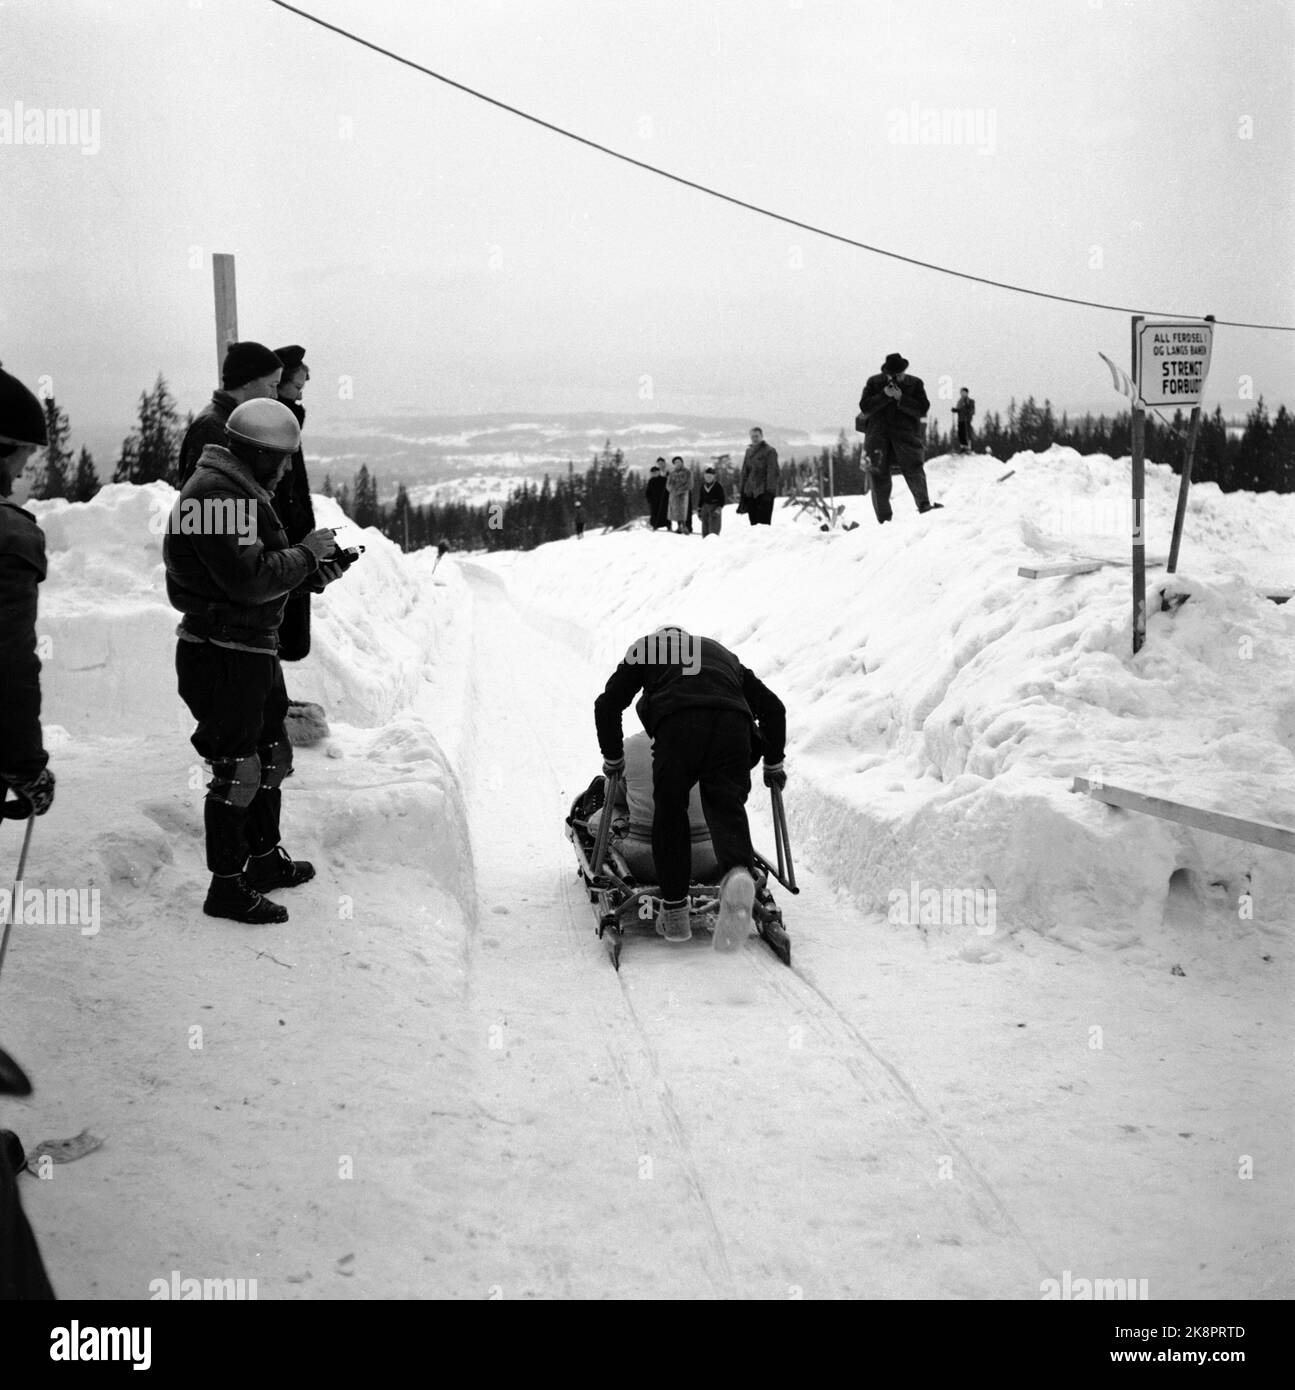 Oslo, Frognerseteren January 1951. The Bobsleigh course, which will be built for the Olympic Winter Games next winter, is ready for test driving. Here one of the bobs on the way out from the start during the test run. Photo: Skotaam and Kjus / Current / NTB Stock Photo